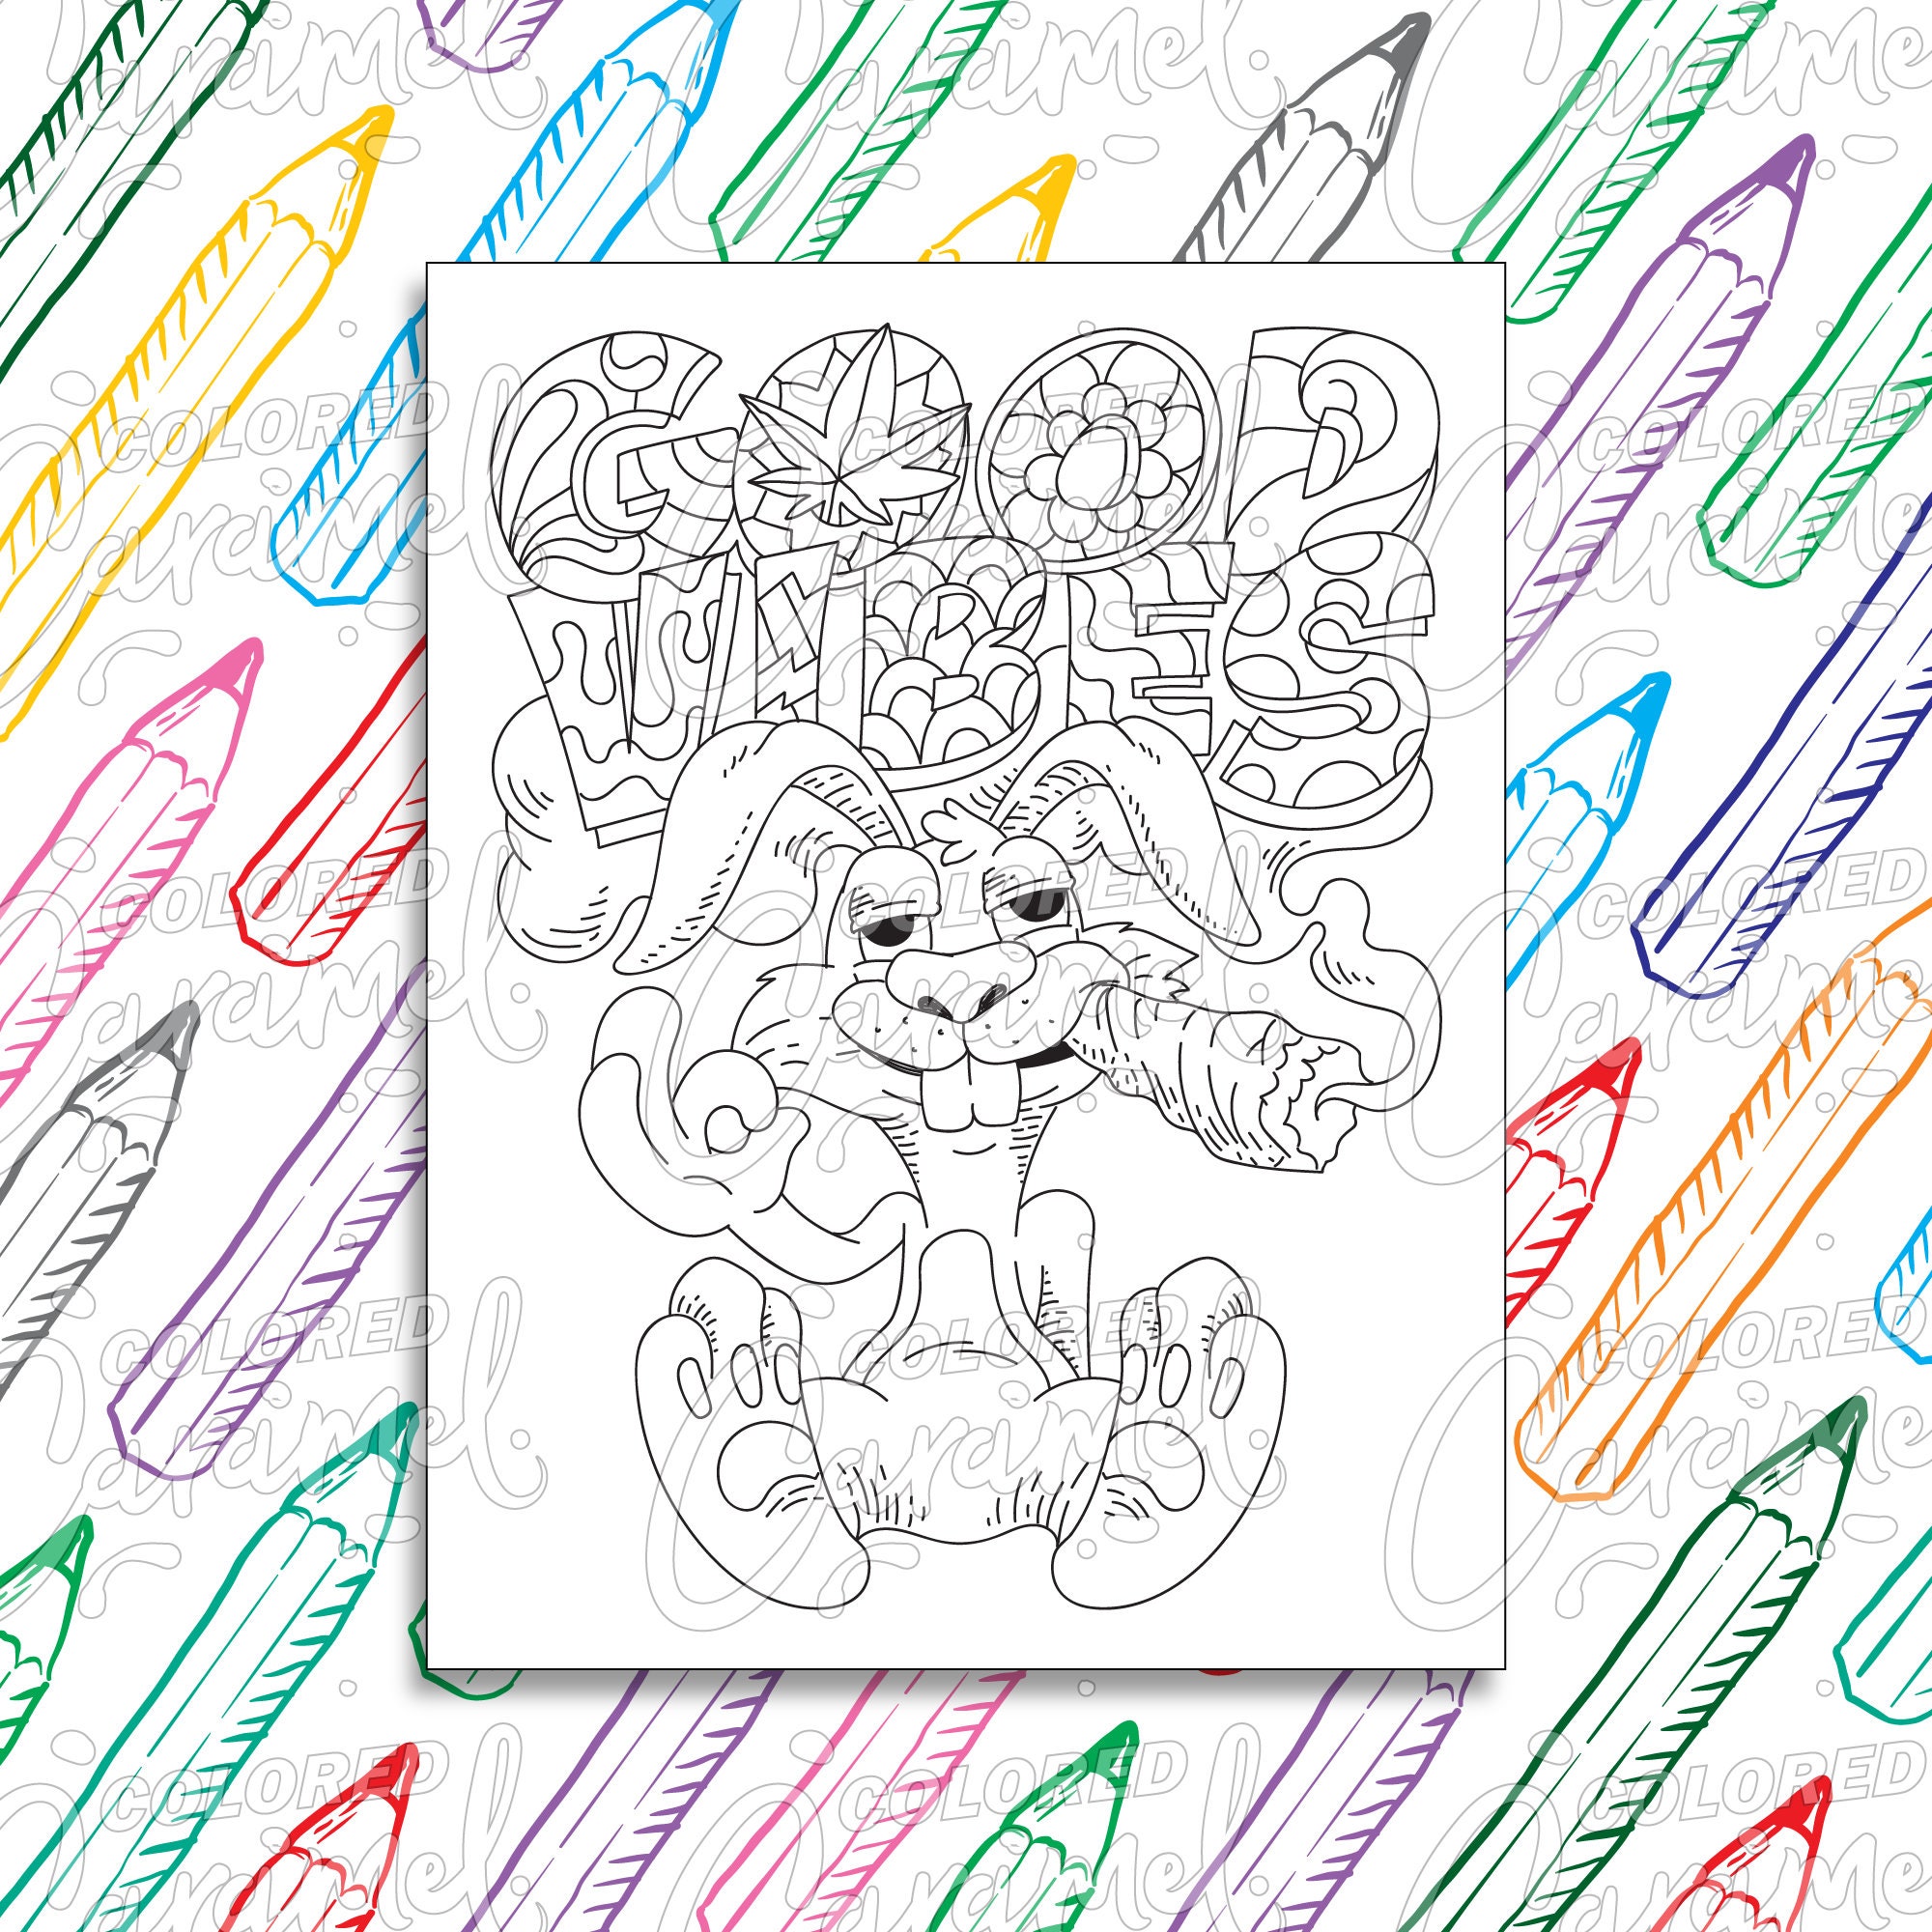 Stoner Coloring Page Digital Download PDF, Trippy, Funny and Cool Rabbit Bunny Smoking Weed, Printable Psychedelic Drawing & Illustration